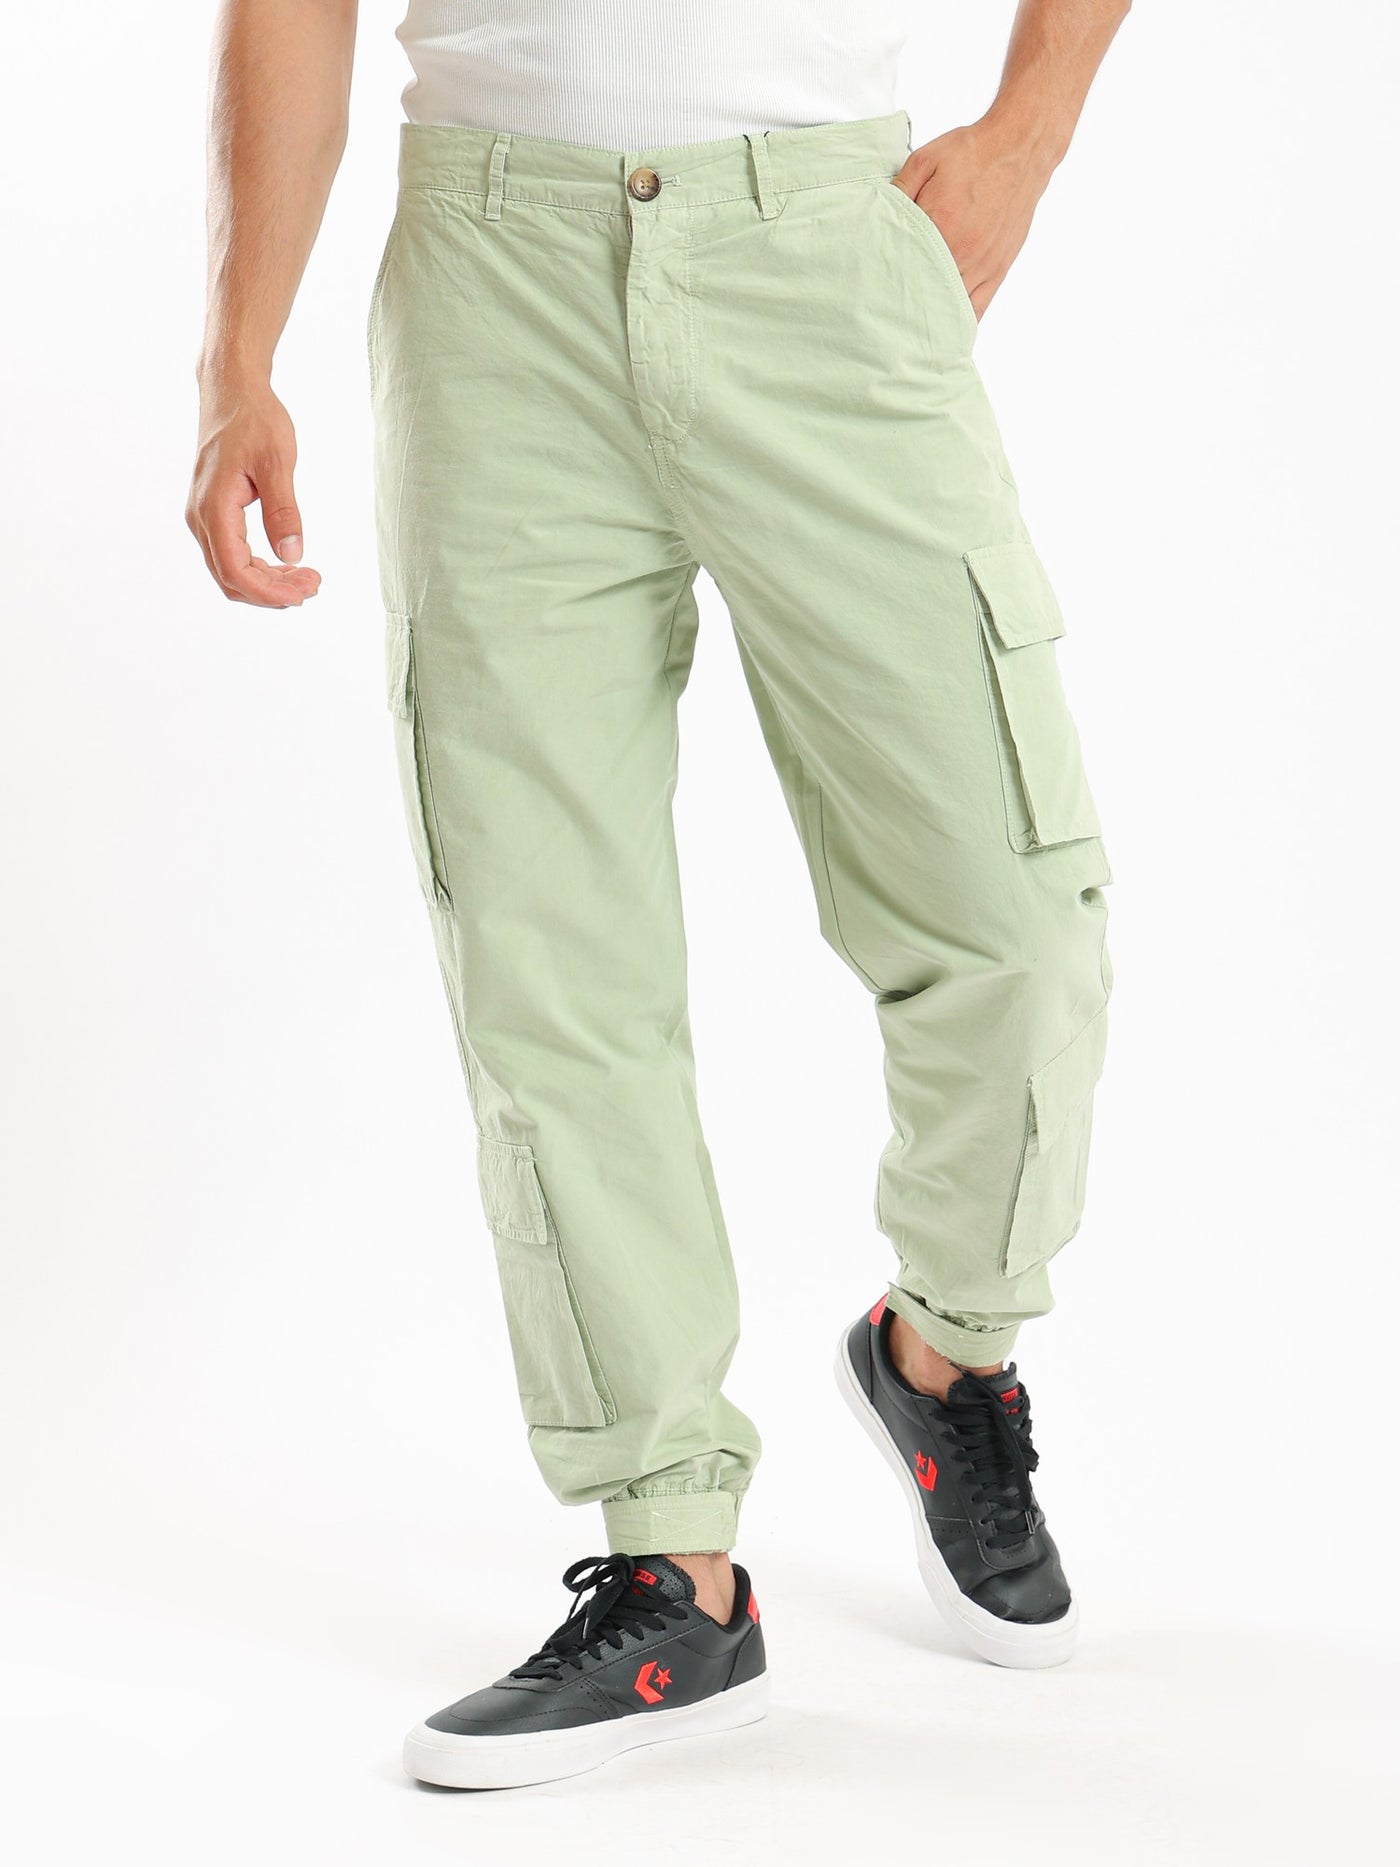 Pants - Cargo - With Pockets